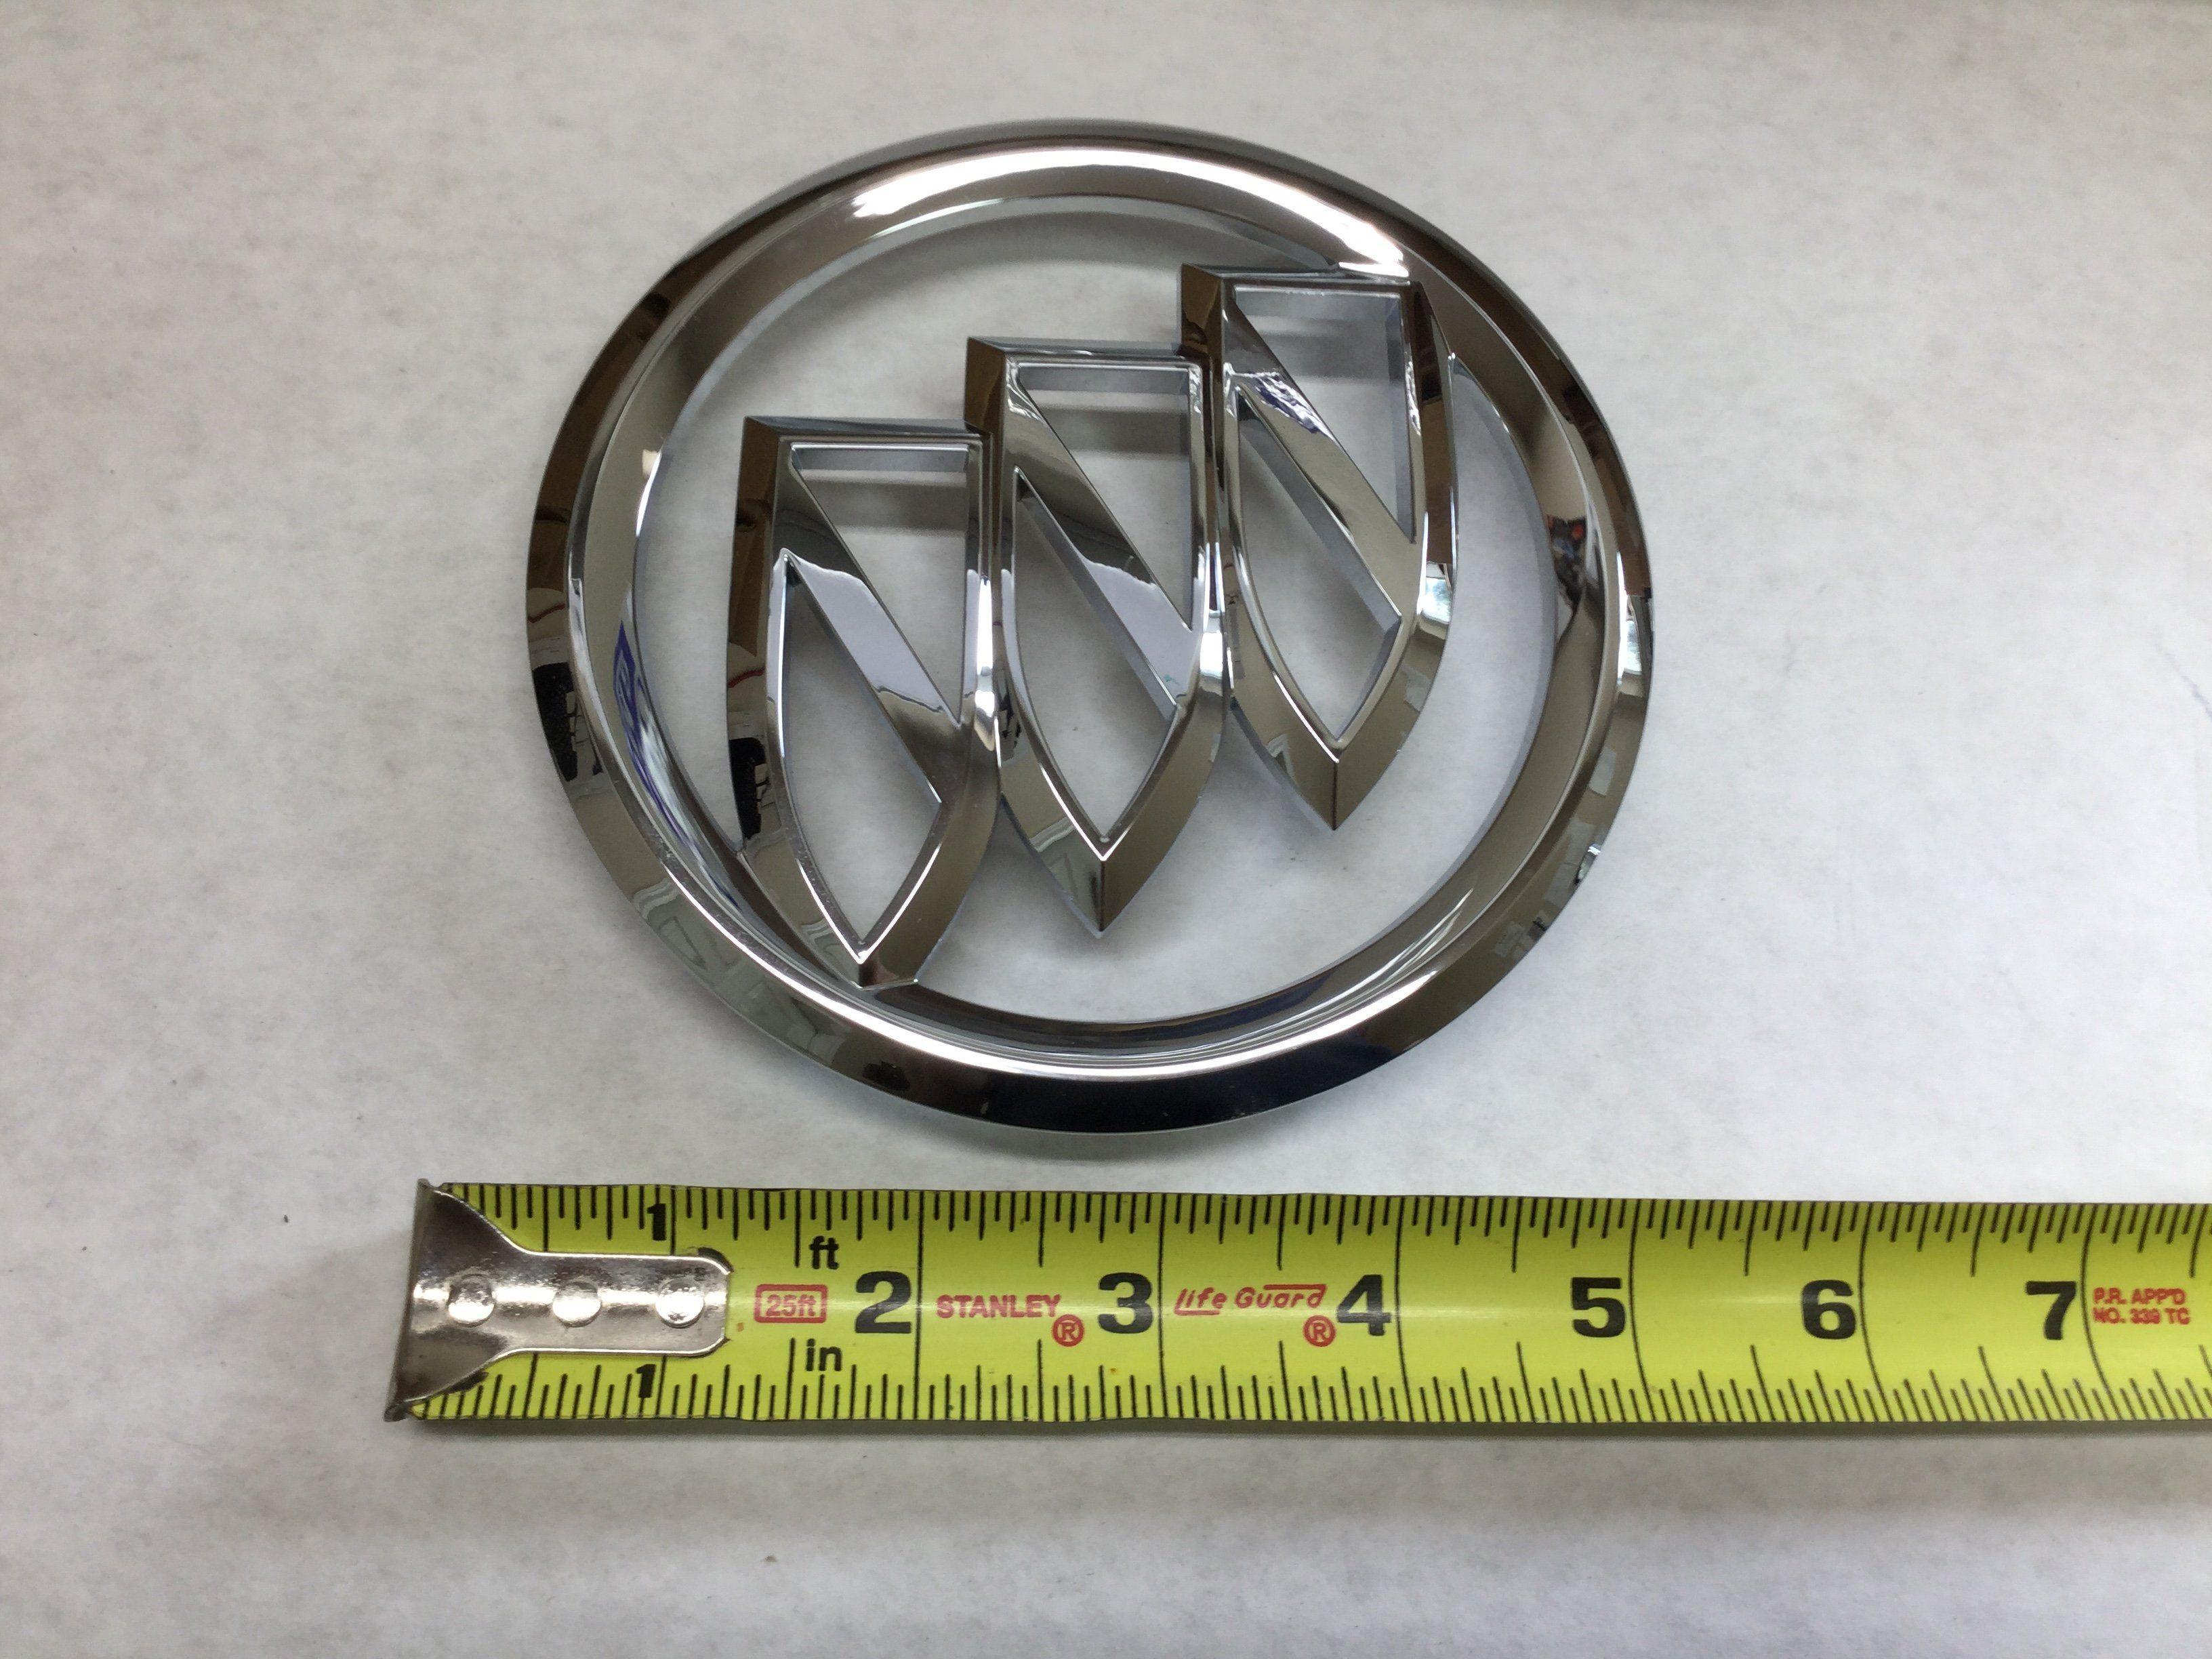 2014 Buick Logo - New 2006-2009 Buick Lucerne or Lacrosse Front Grill Emblem Genuine ...